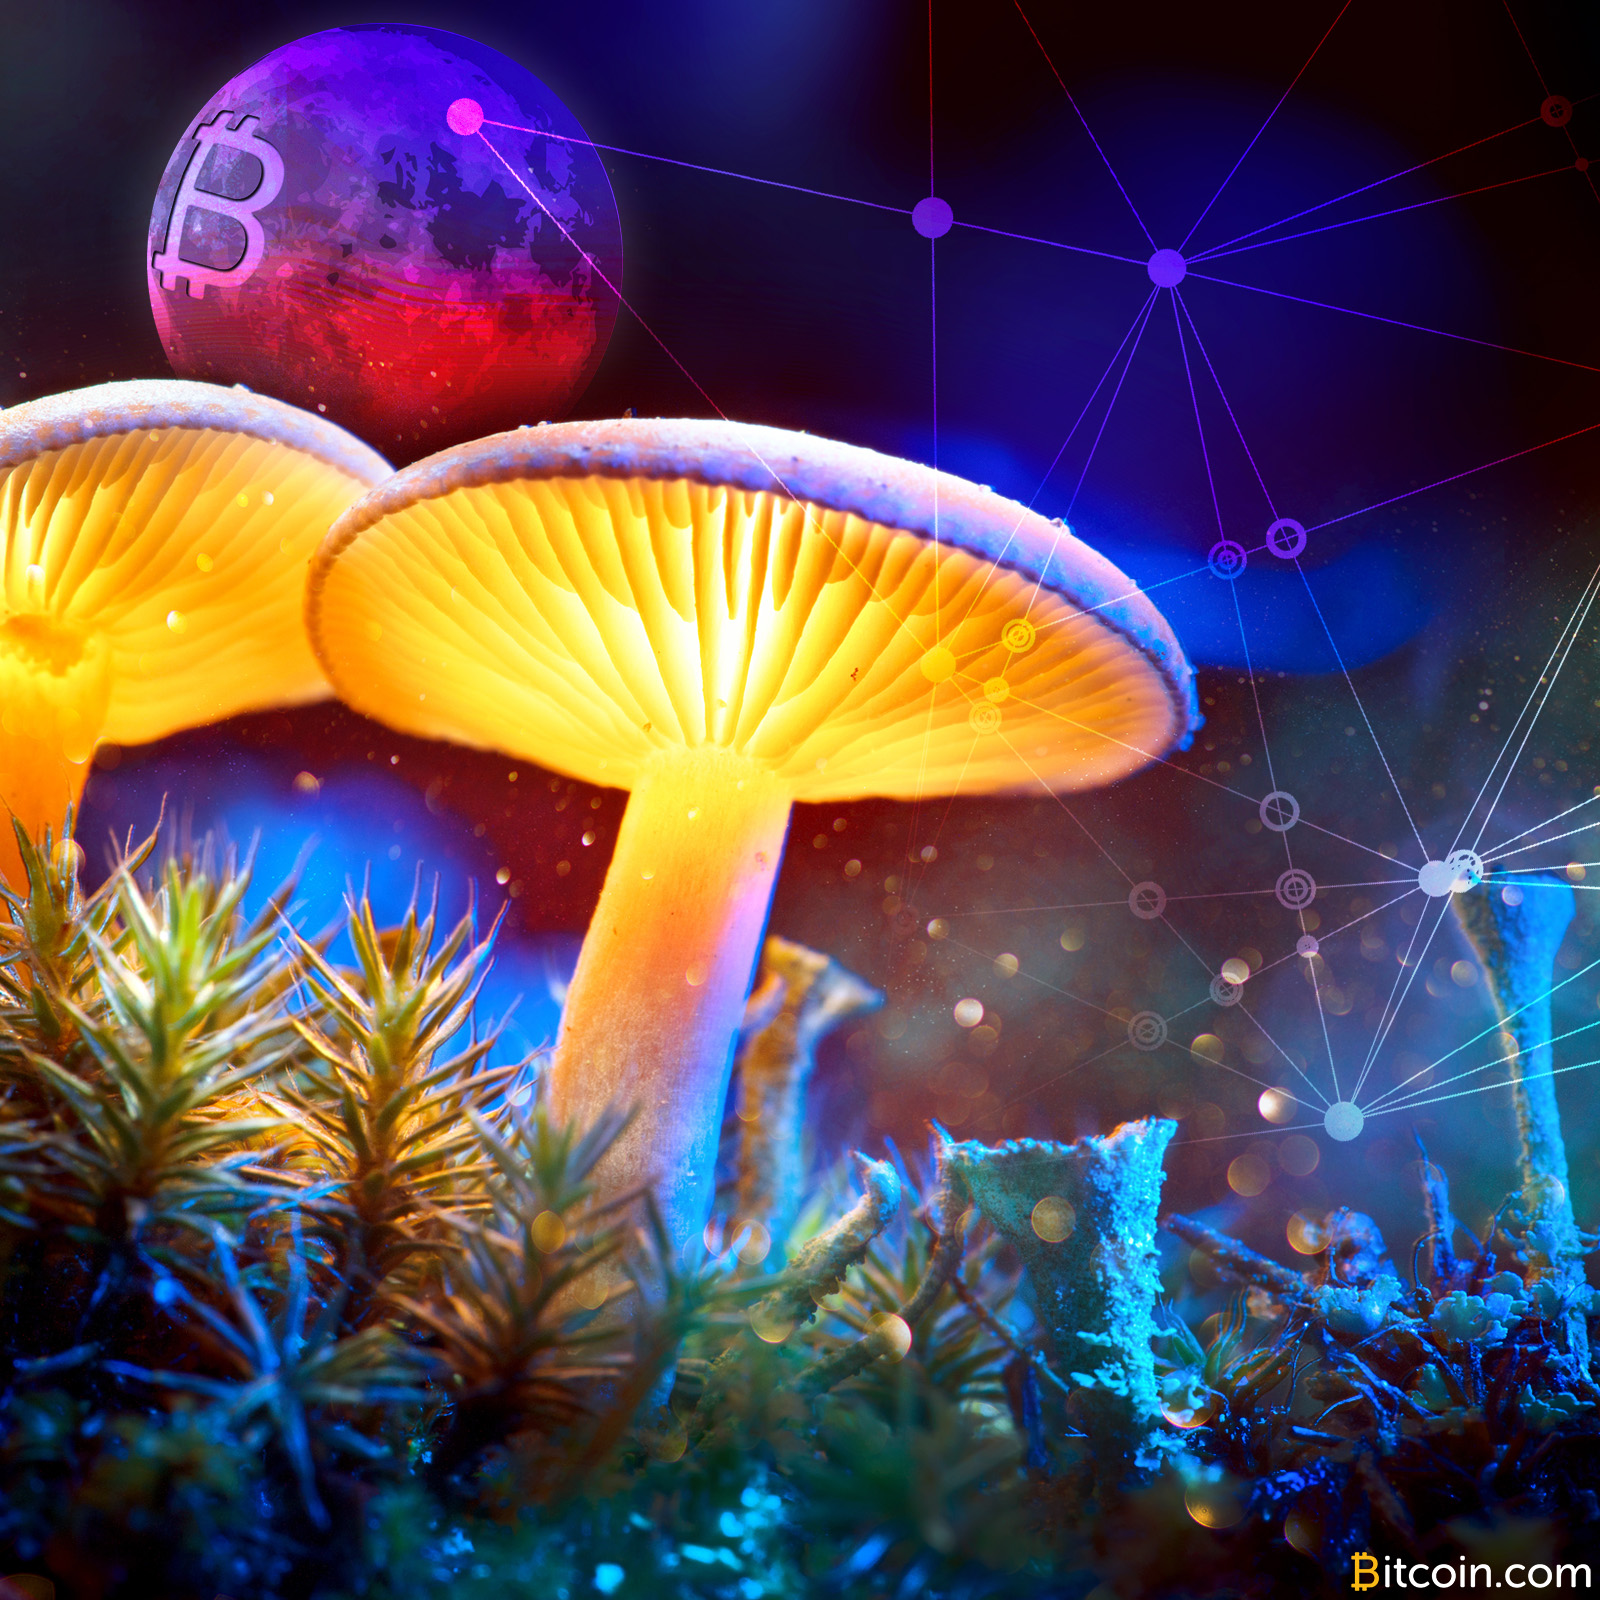 Of Moonshots and Mushrooms: Let's Get Beyond Technocratic Thinking